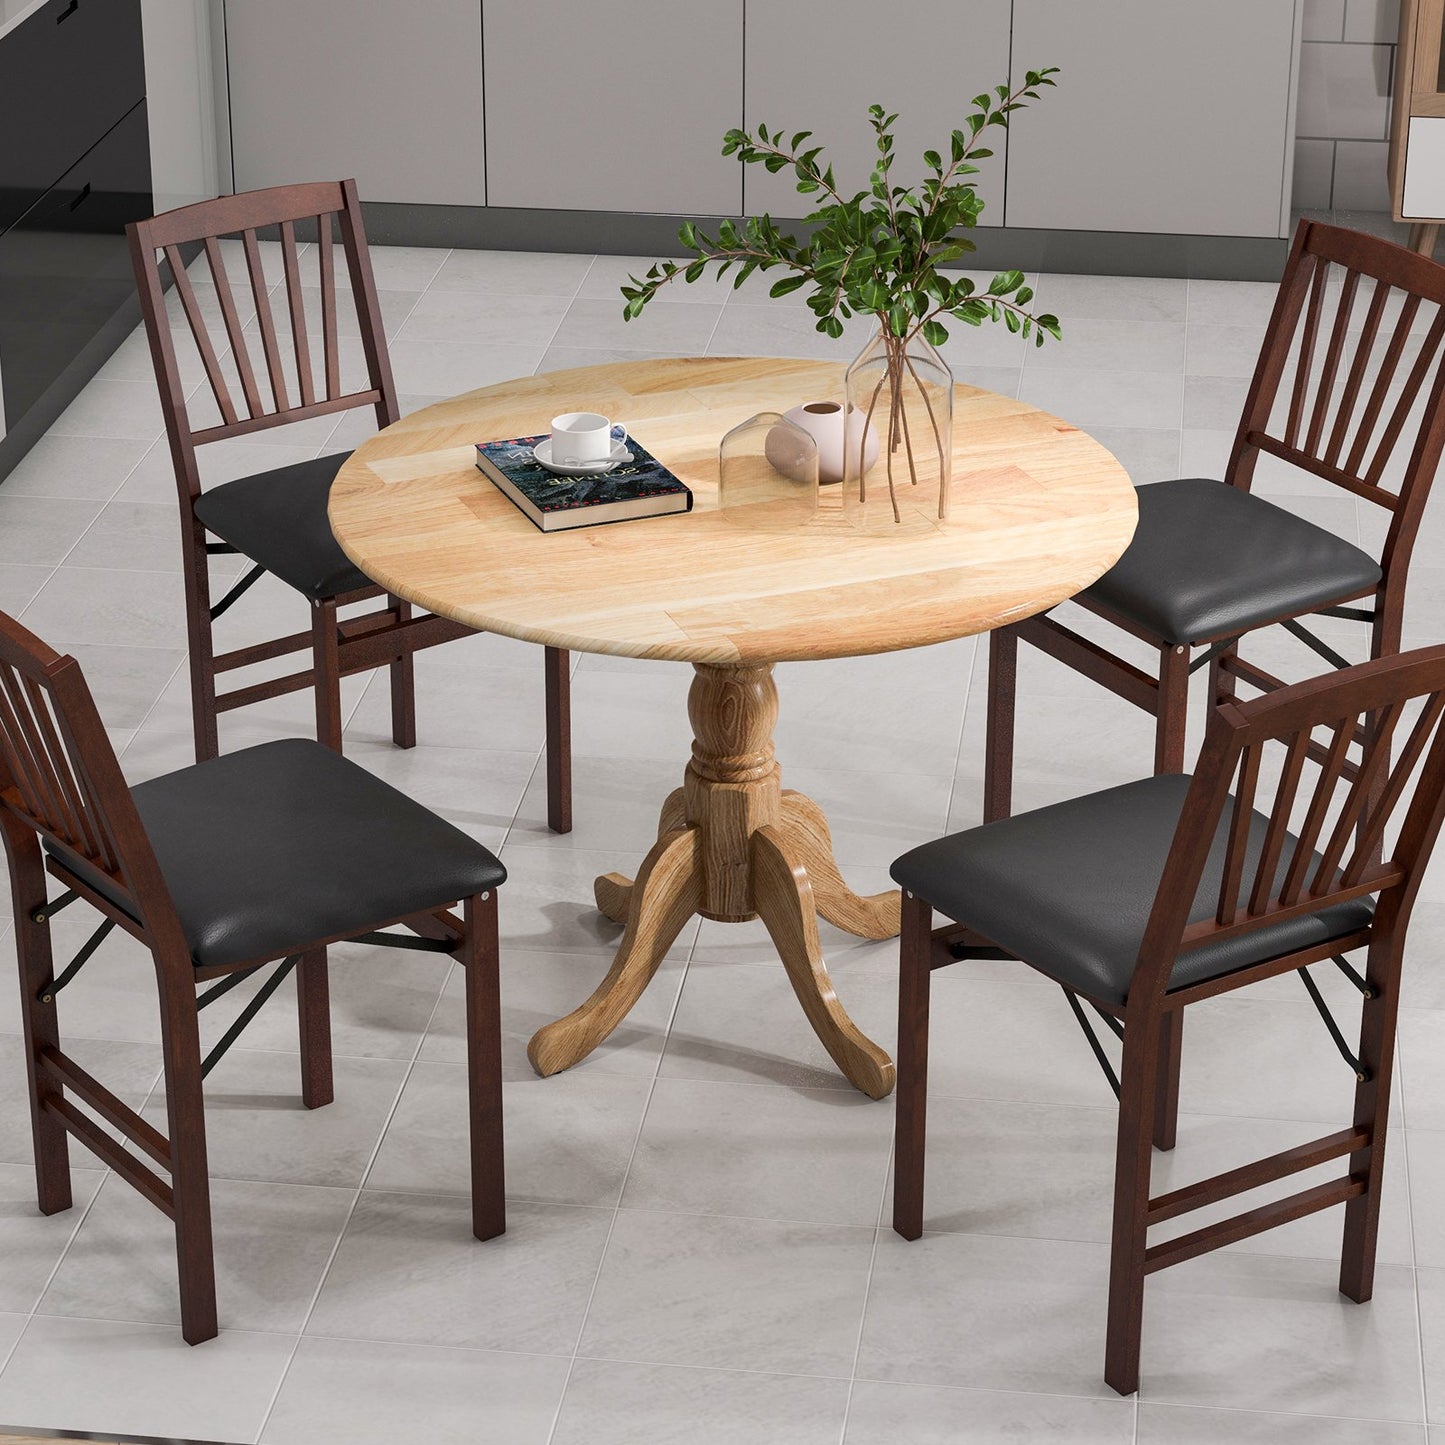 Wooden Dining Table with Round Tabletop and Curved Trestle Legs, Natural